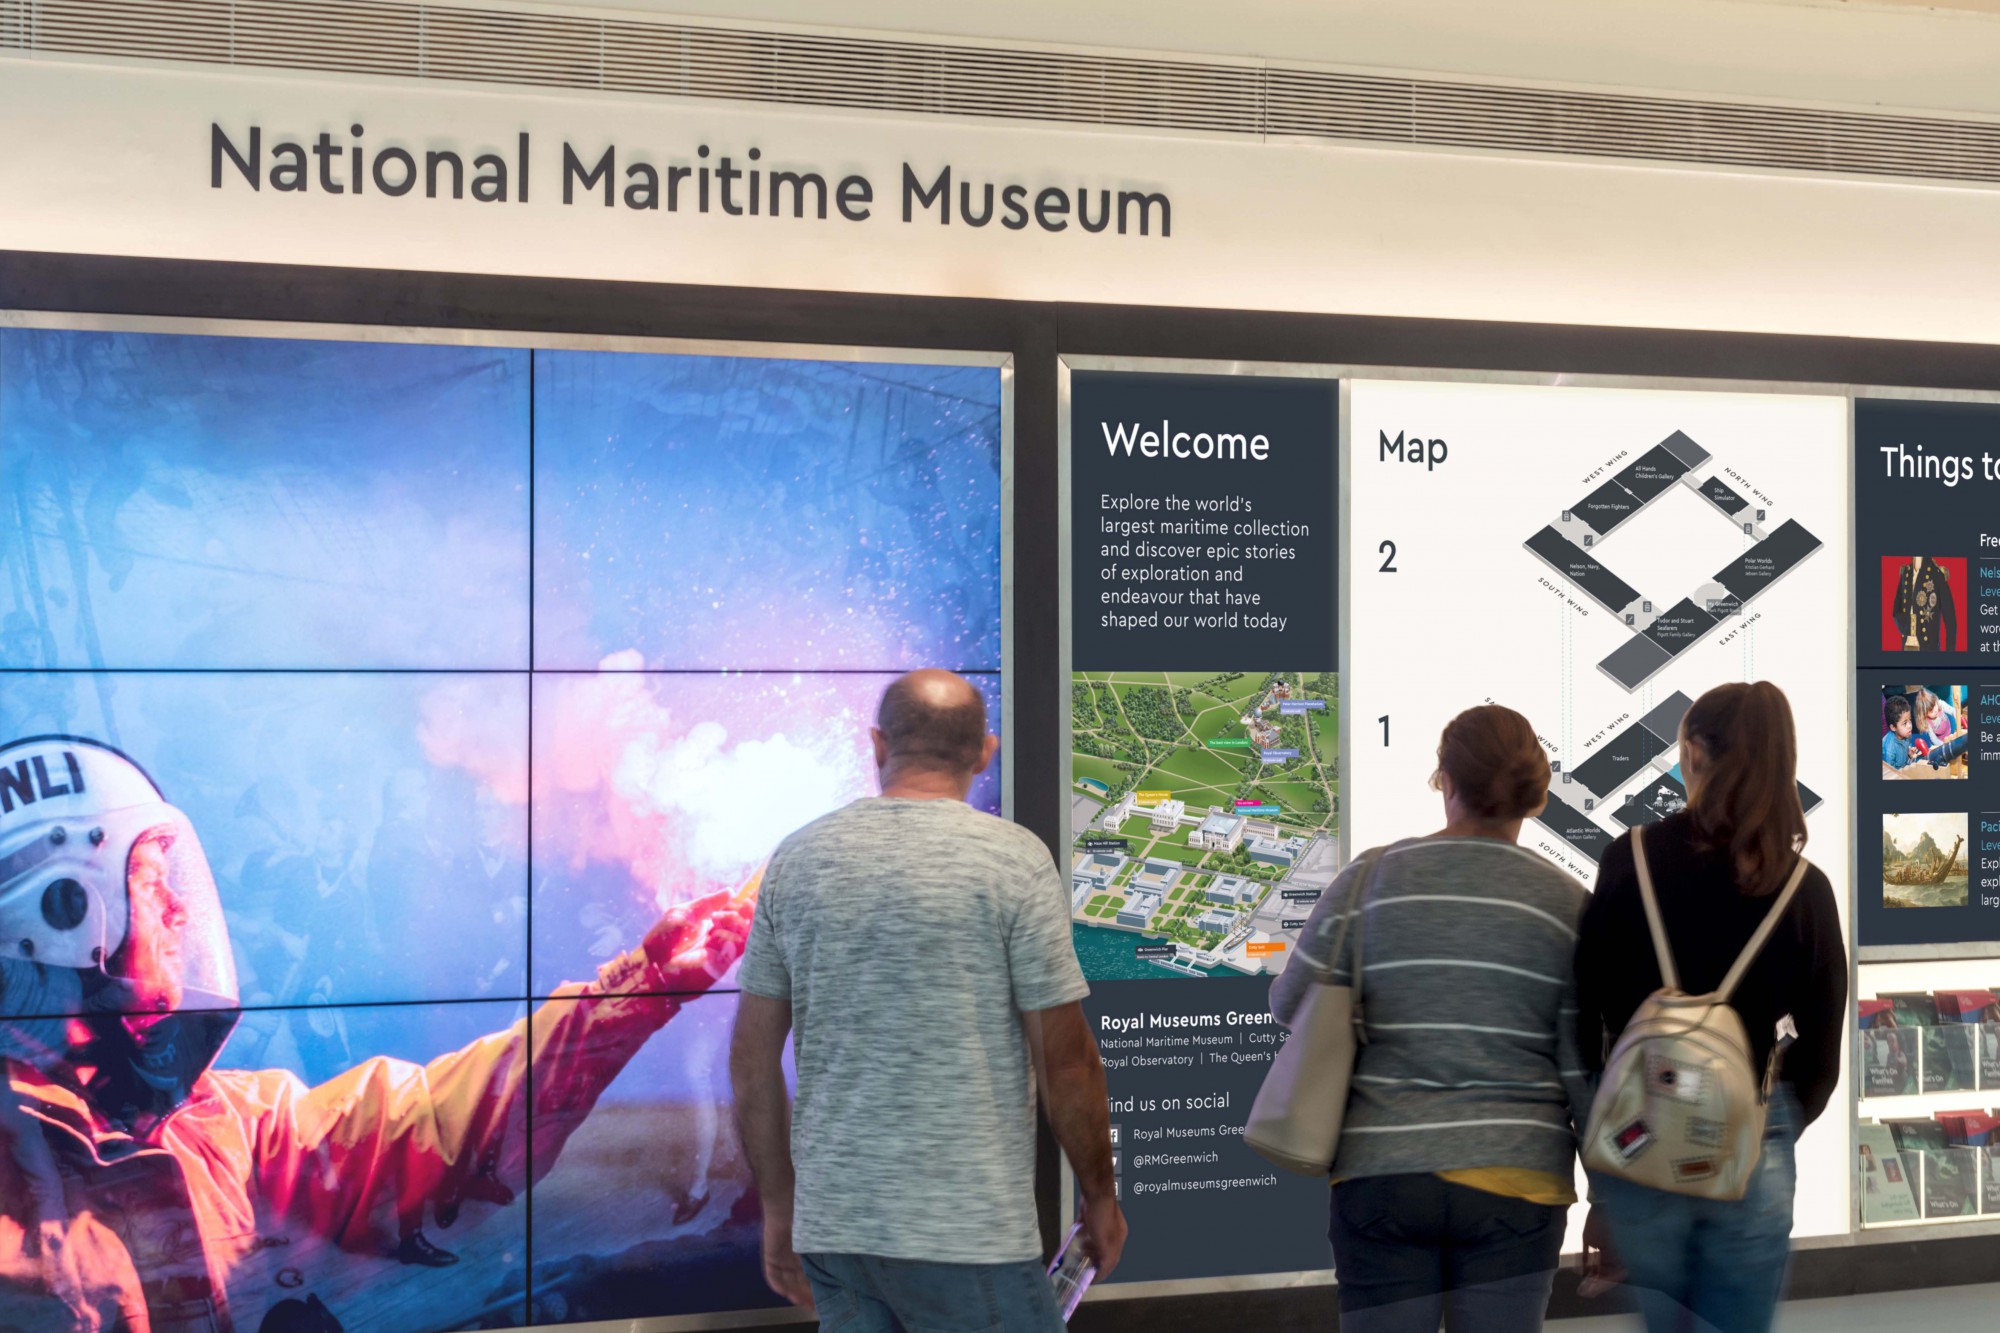 An image showing the welcome wall at the National Maritime Museum. The museum name is at the top of the white wall, in navy text, and a large video shows over multiple screens to the left. To the right, three visitors are standing facing the welcome map that Mima designed for the museum.